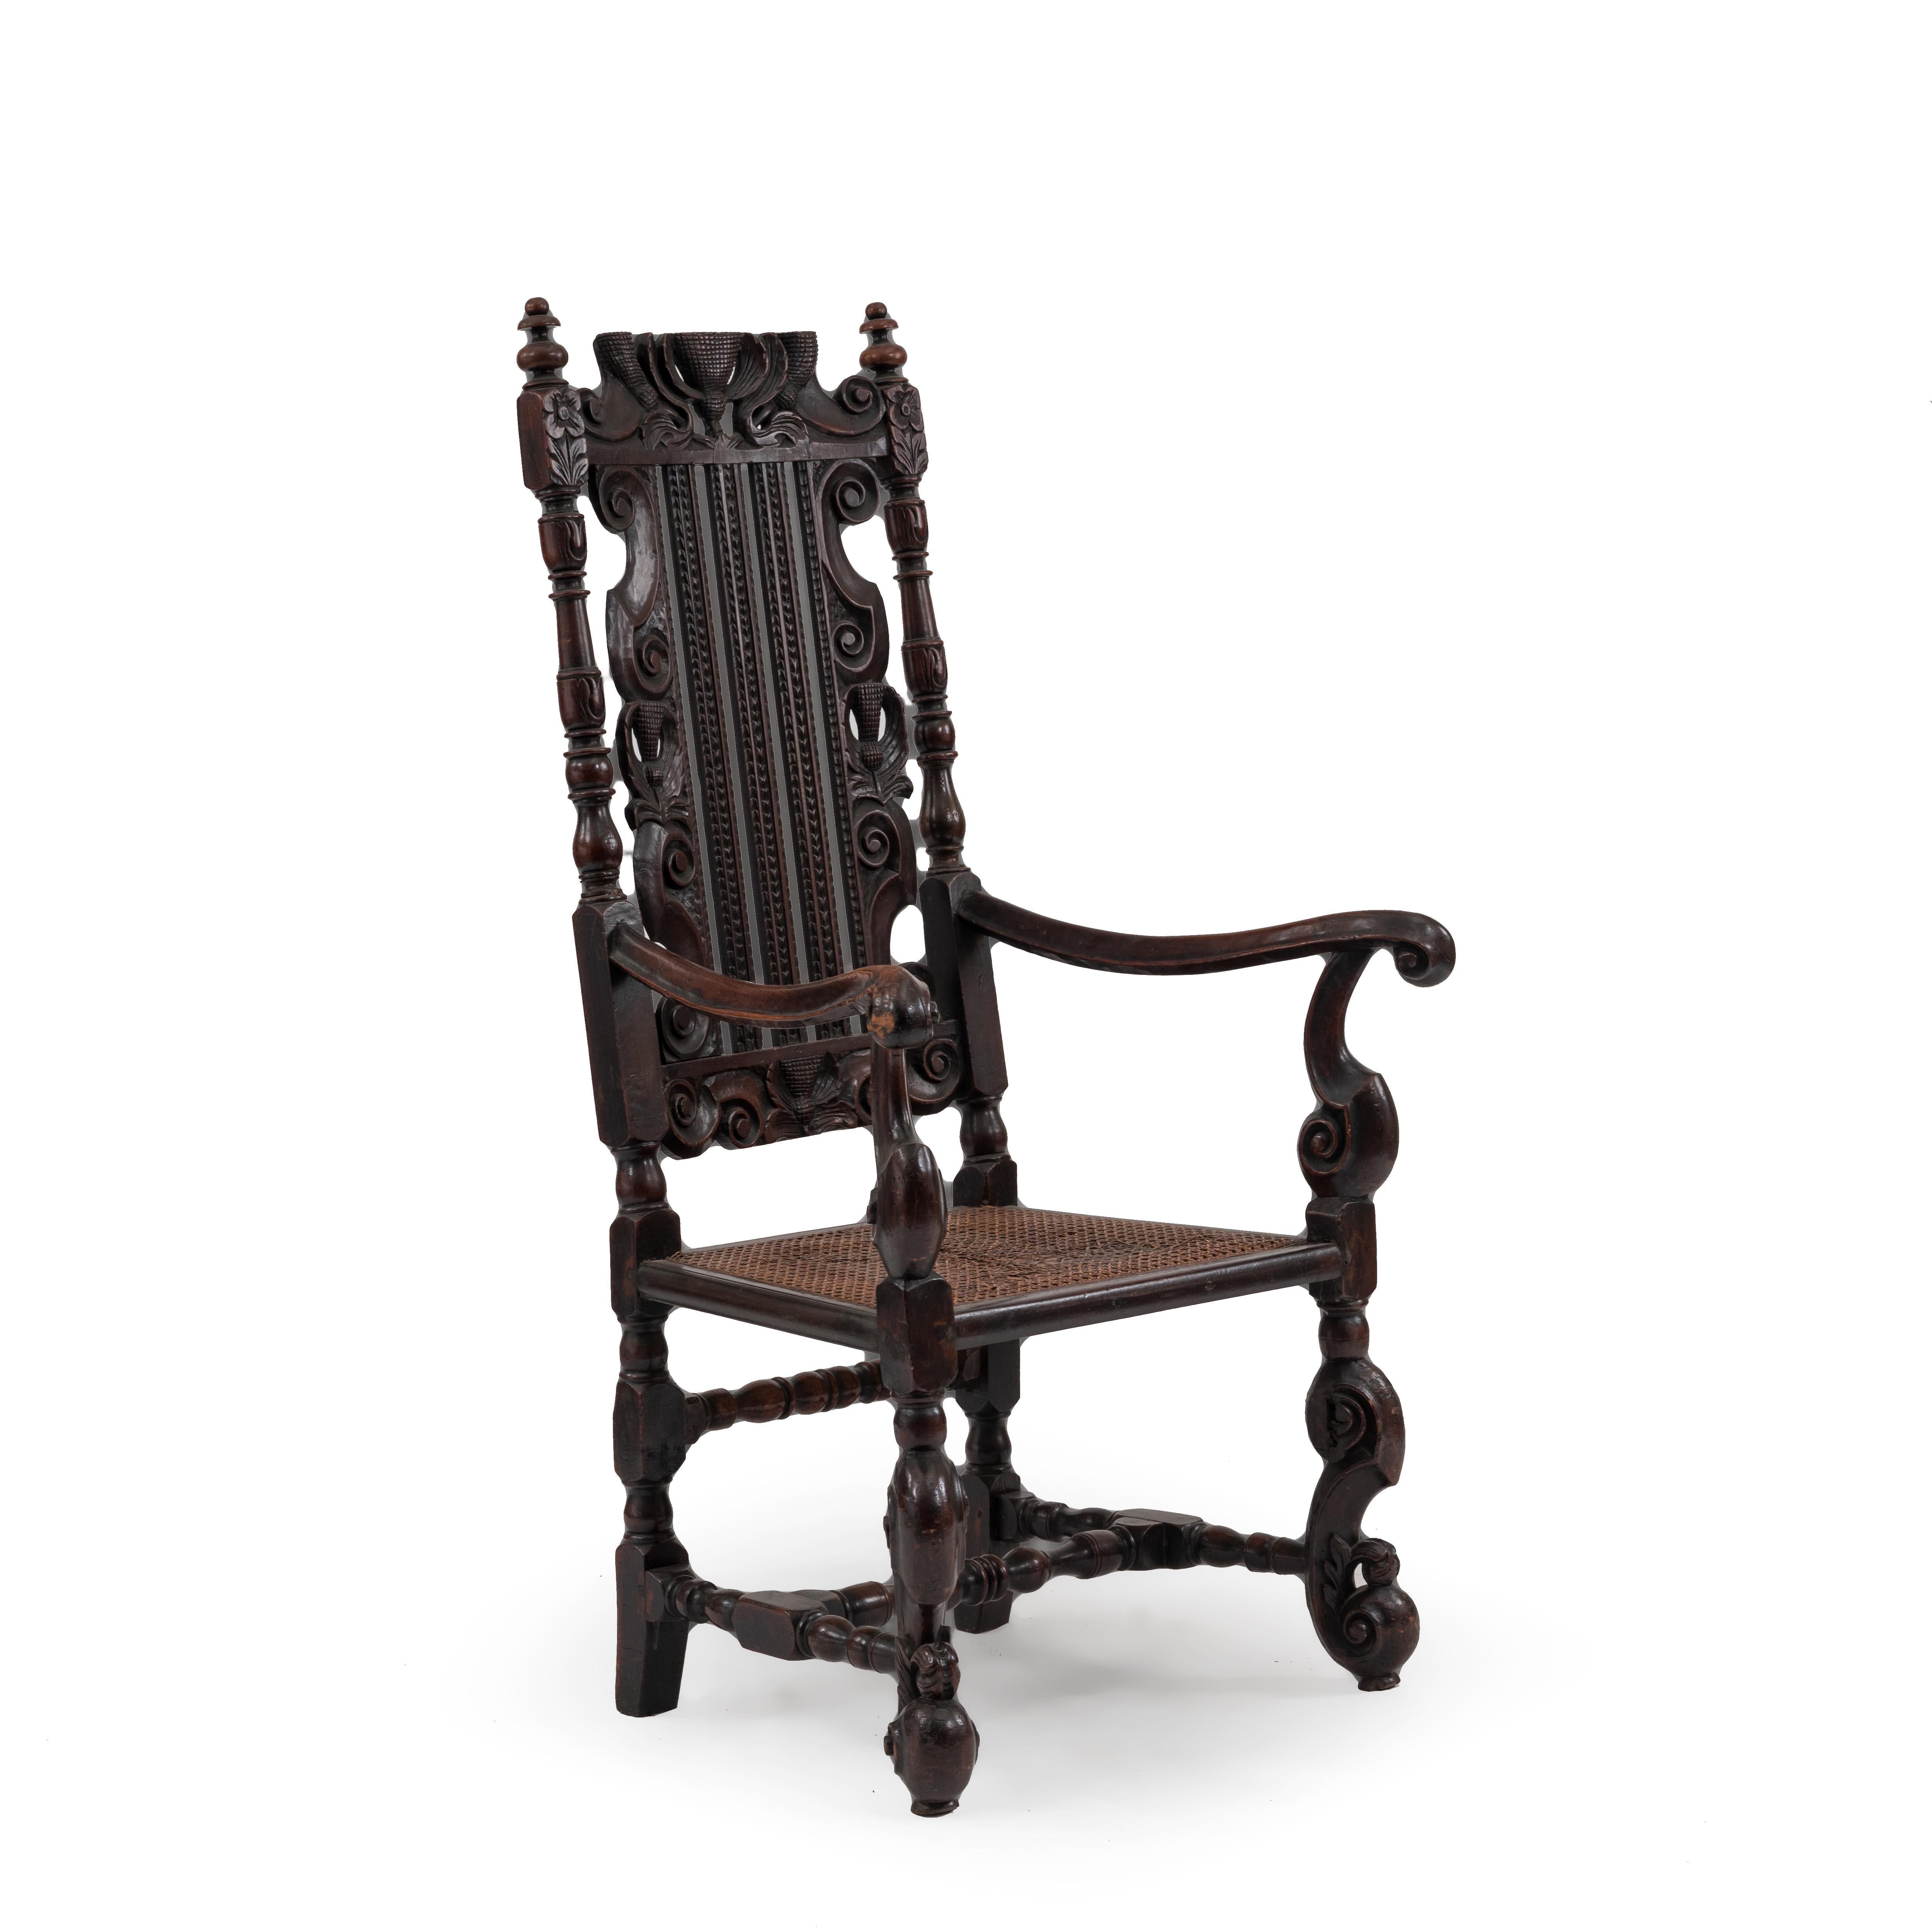 English Charles II style caned & walnut arm chair with vertically slatted back above S scroll legs joined by a stretcher. (19th Cent & possibly with earlier elements).
 